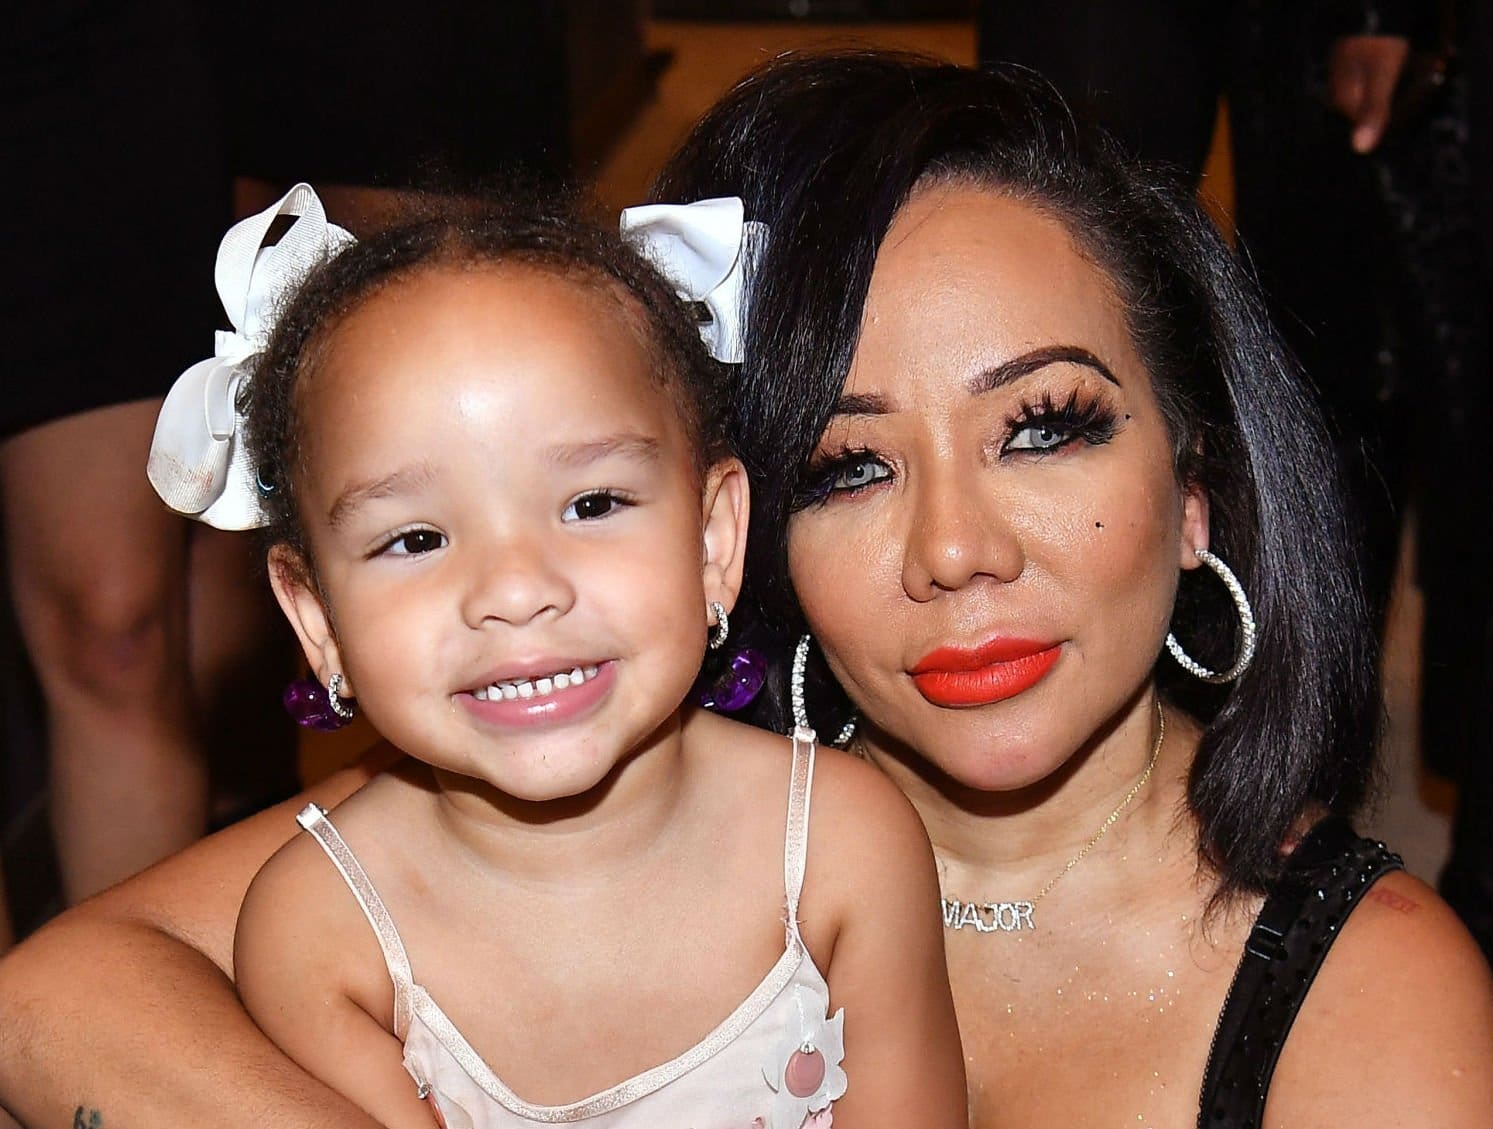 T.I. And Tiny Harris' Daughter, Heiress Harris Is The Funniest In This Clip - Check her Out Wearing A Blonde Wig!